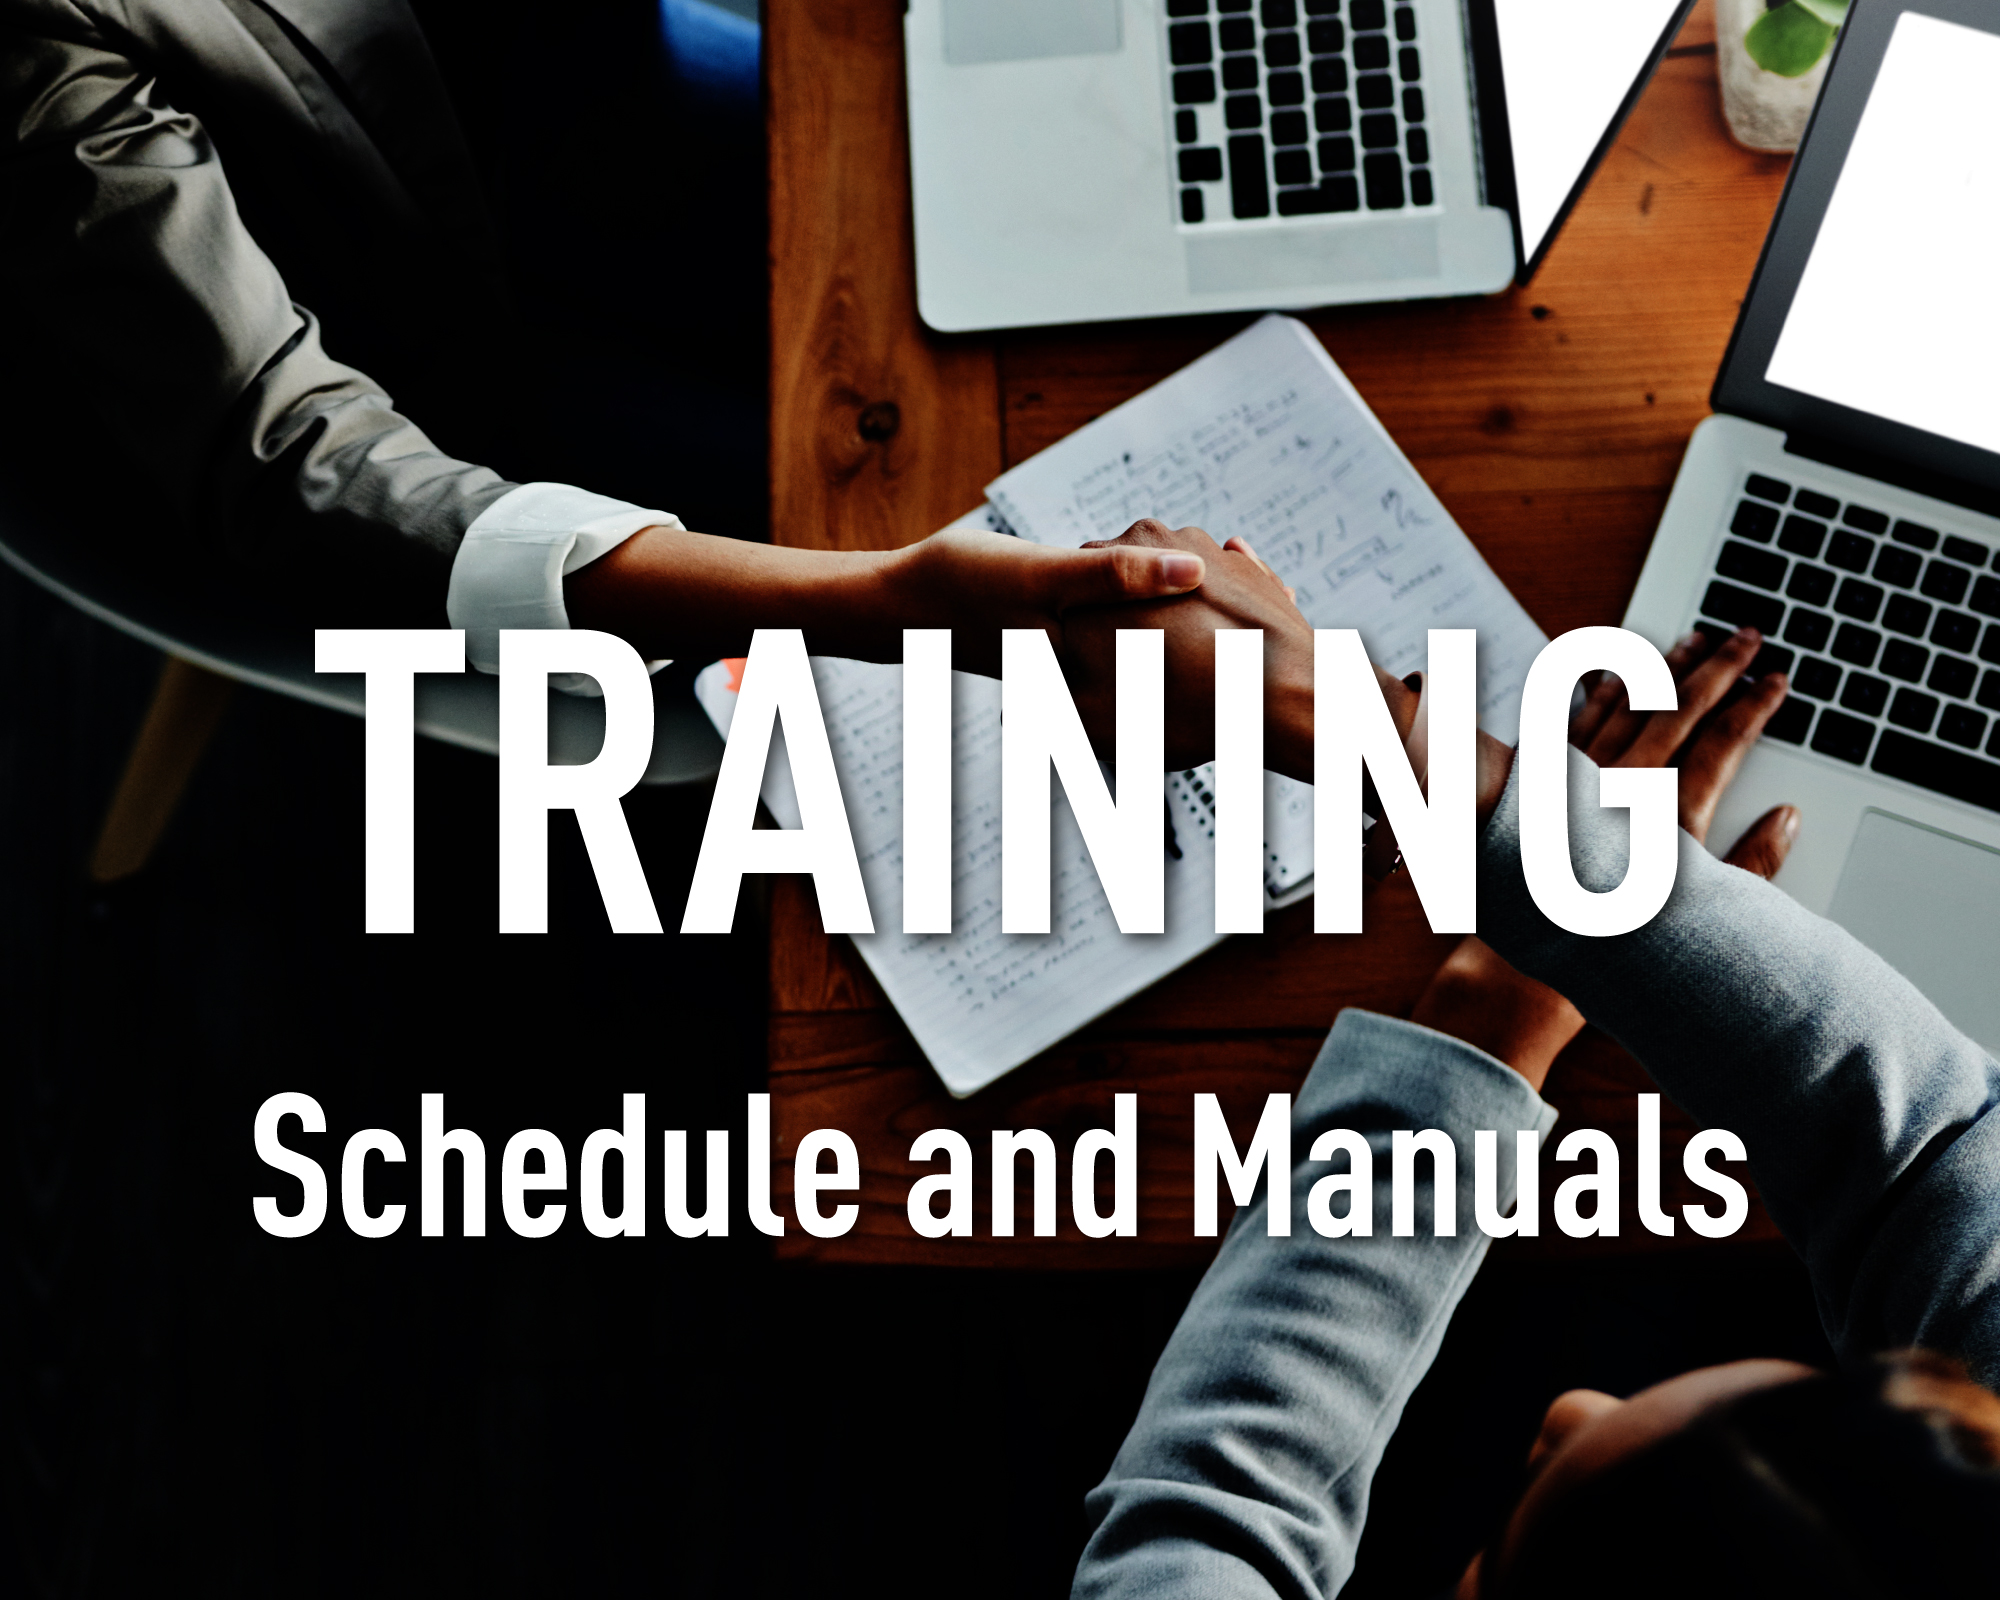 Training. Schedule and Manuals.